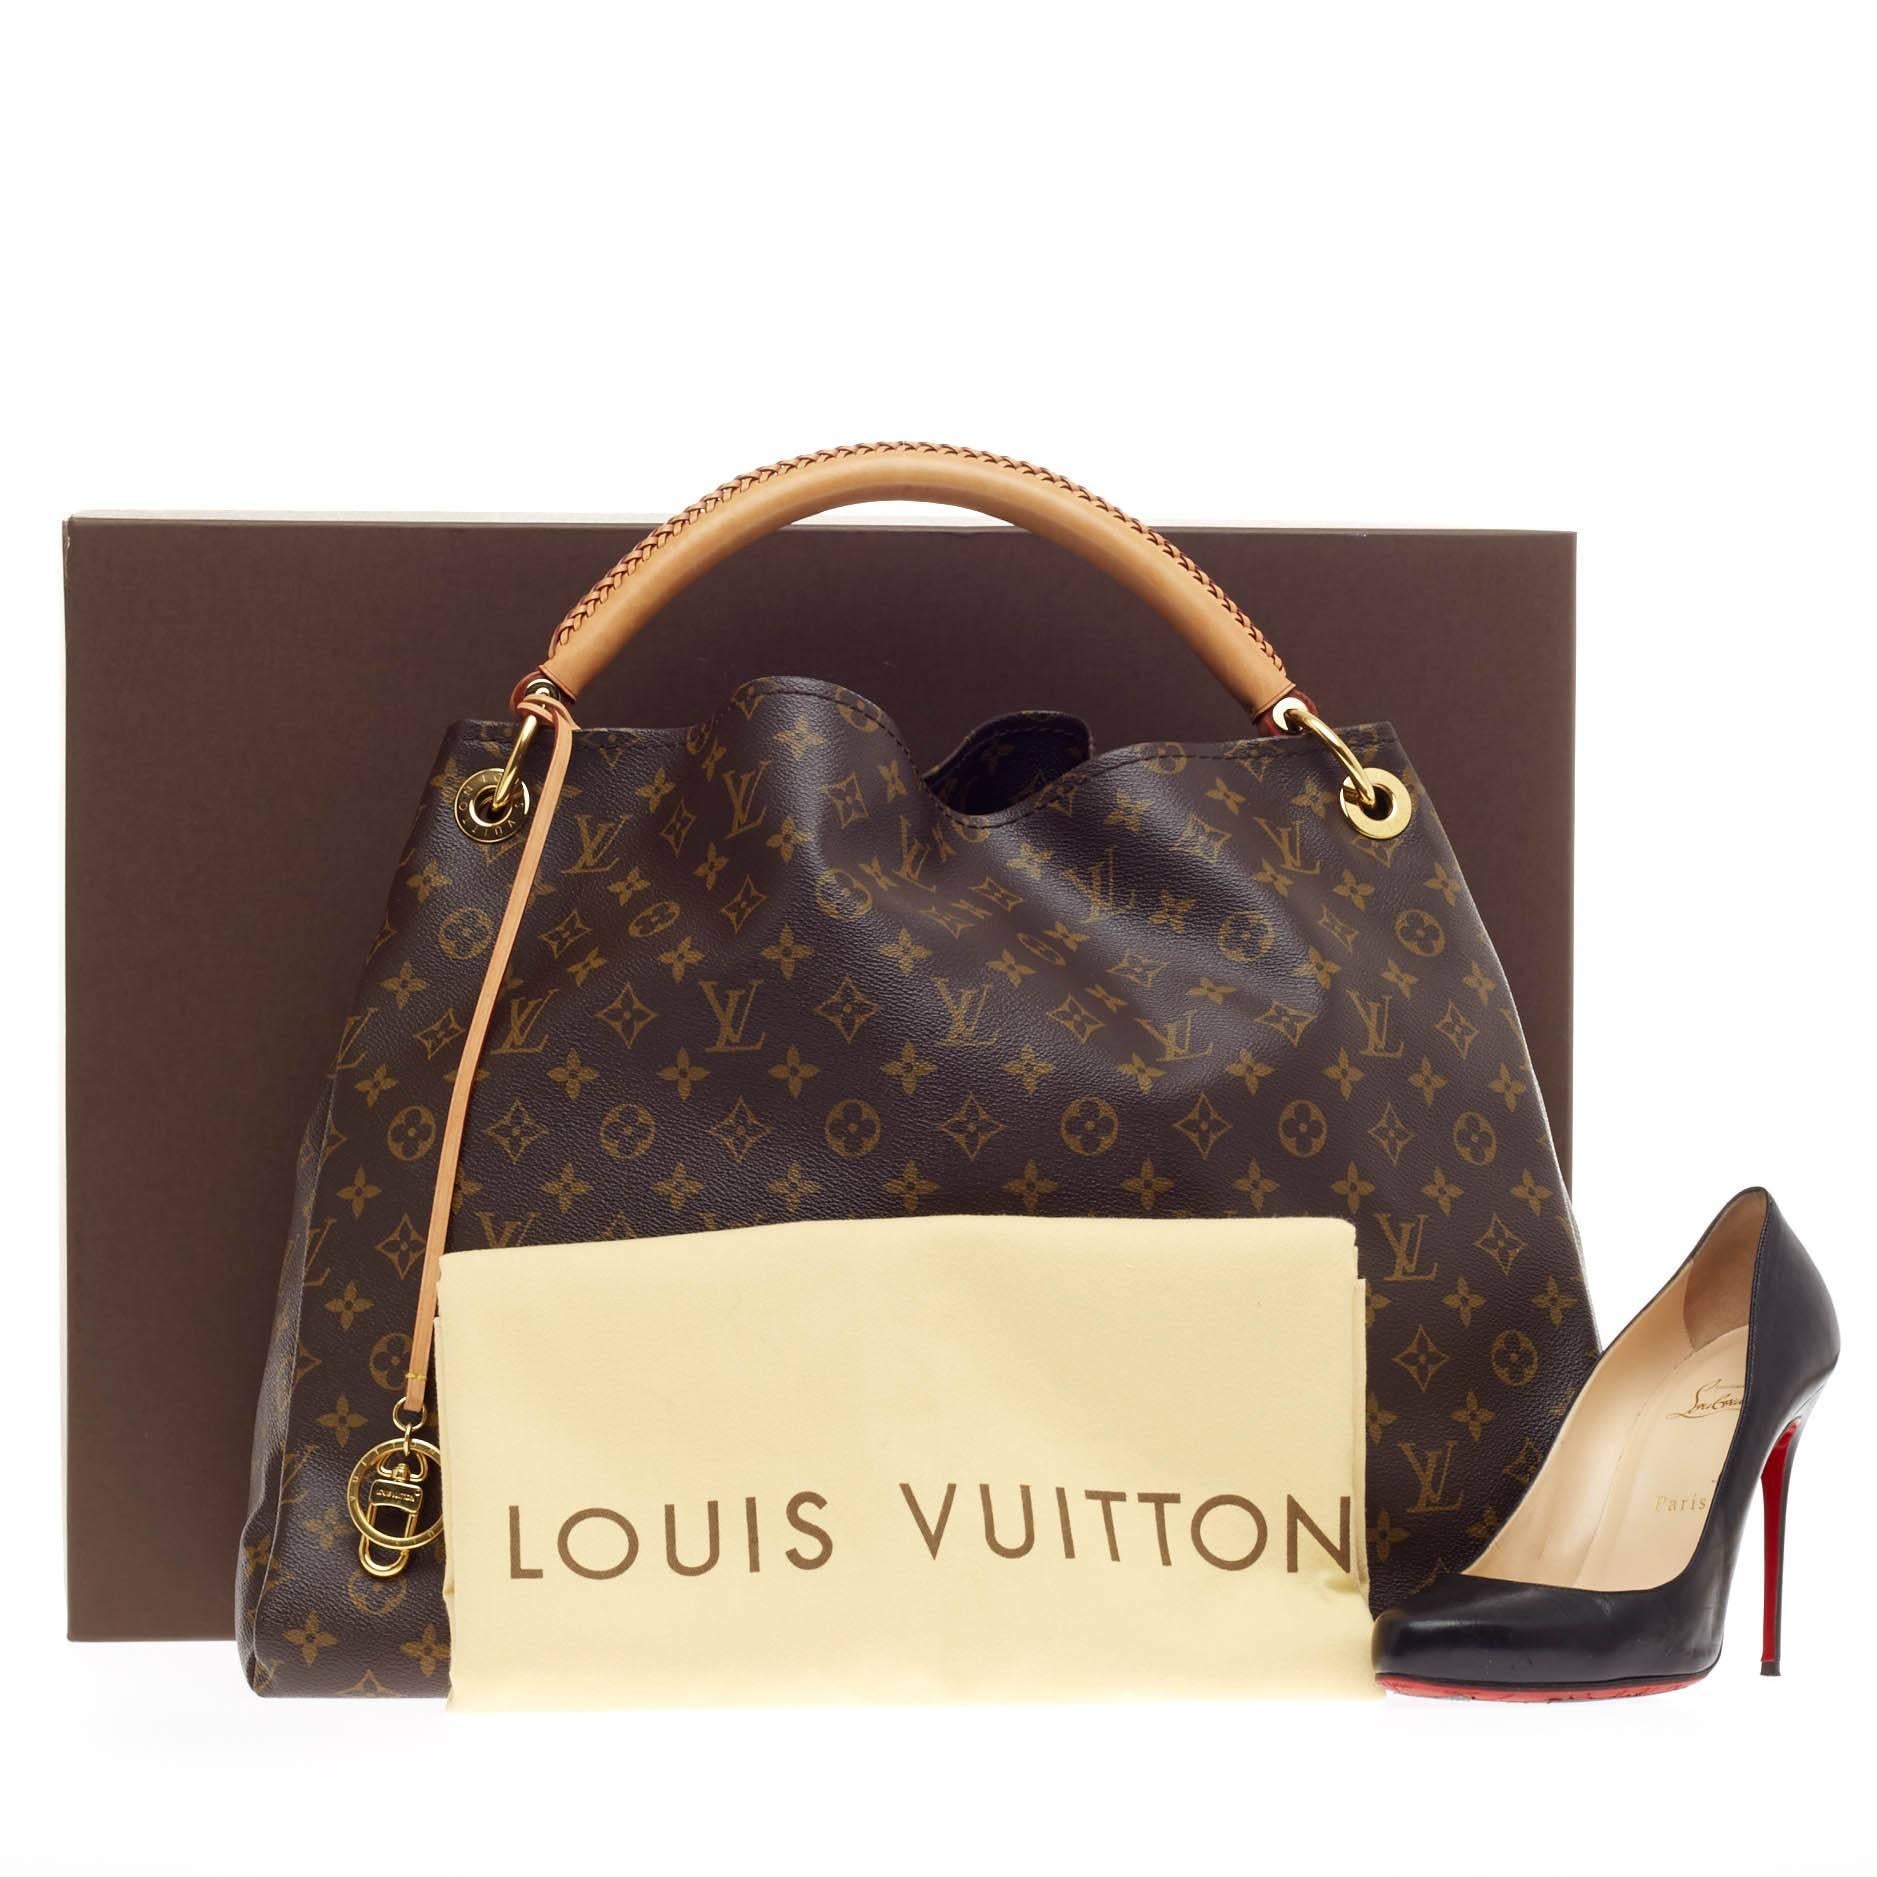 This authentic Louis Vuitton Artsy Monogram Canvas GM is an elegant and iconic bag that adds a stylish flair to any outfit. Crafted from Louis Vuitton's iconic monogram canvas and featuring a single looped hand-crafted leather handle, this roomy